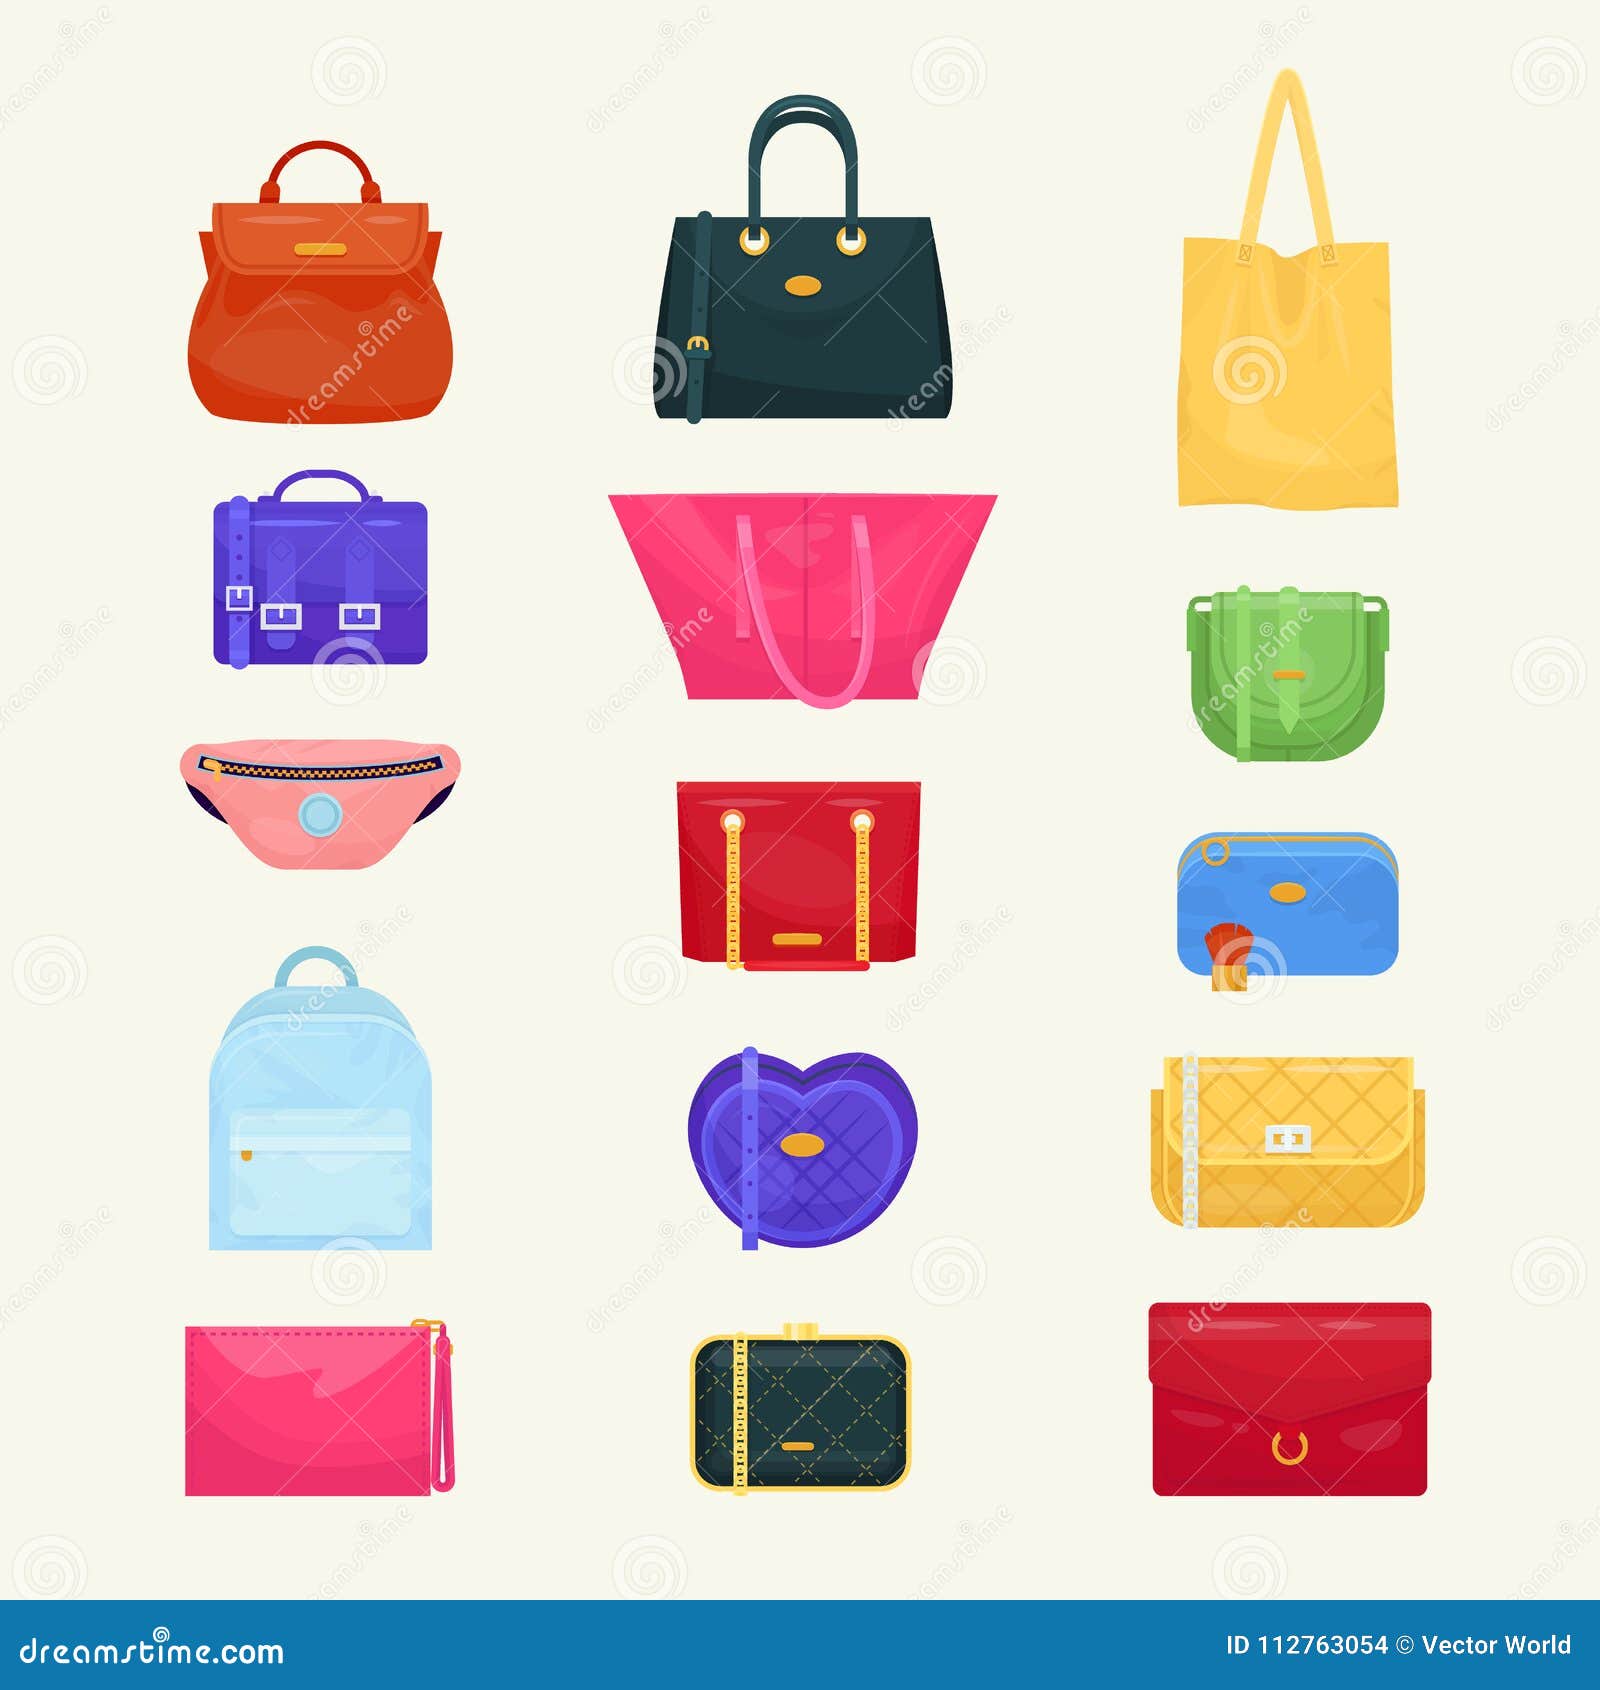 woman bag  girls handbag or purse and shopping-bag or baggy package from fashion store  set of